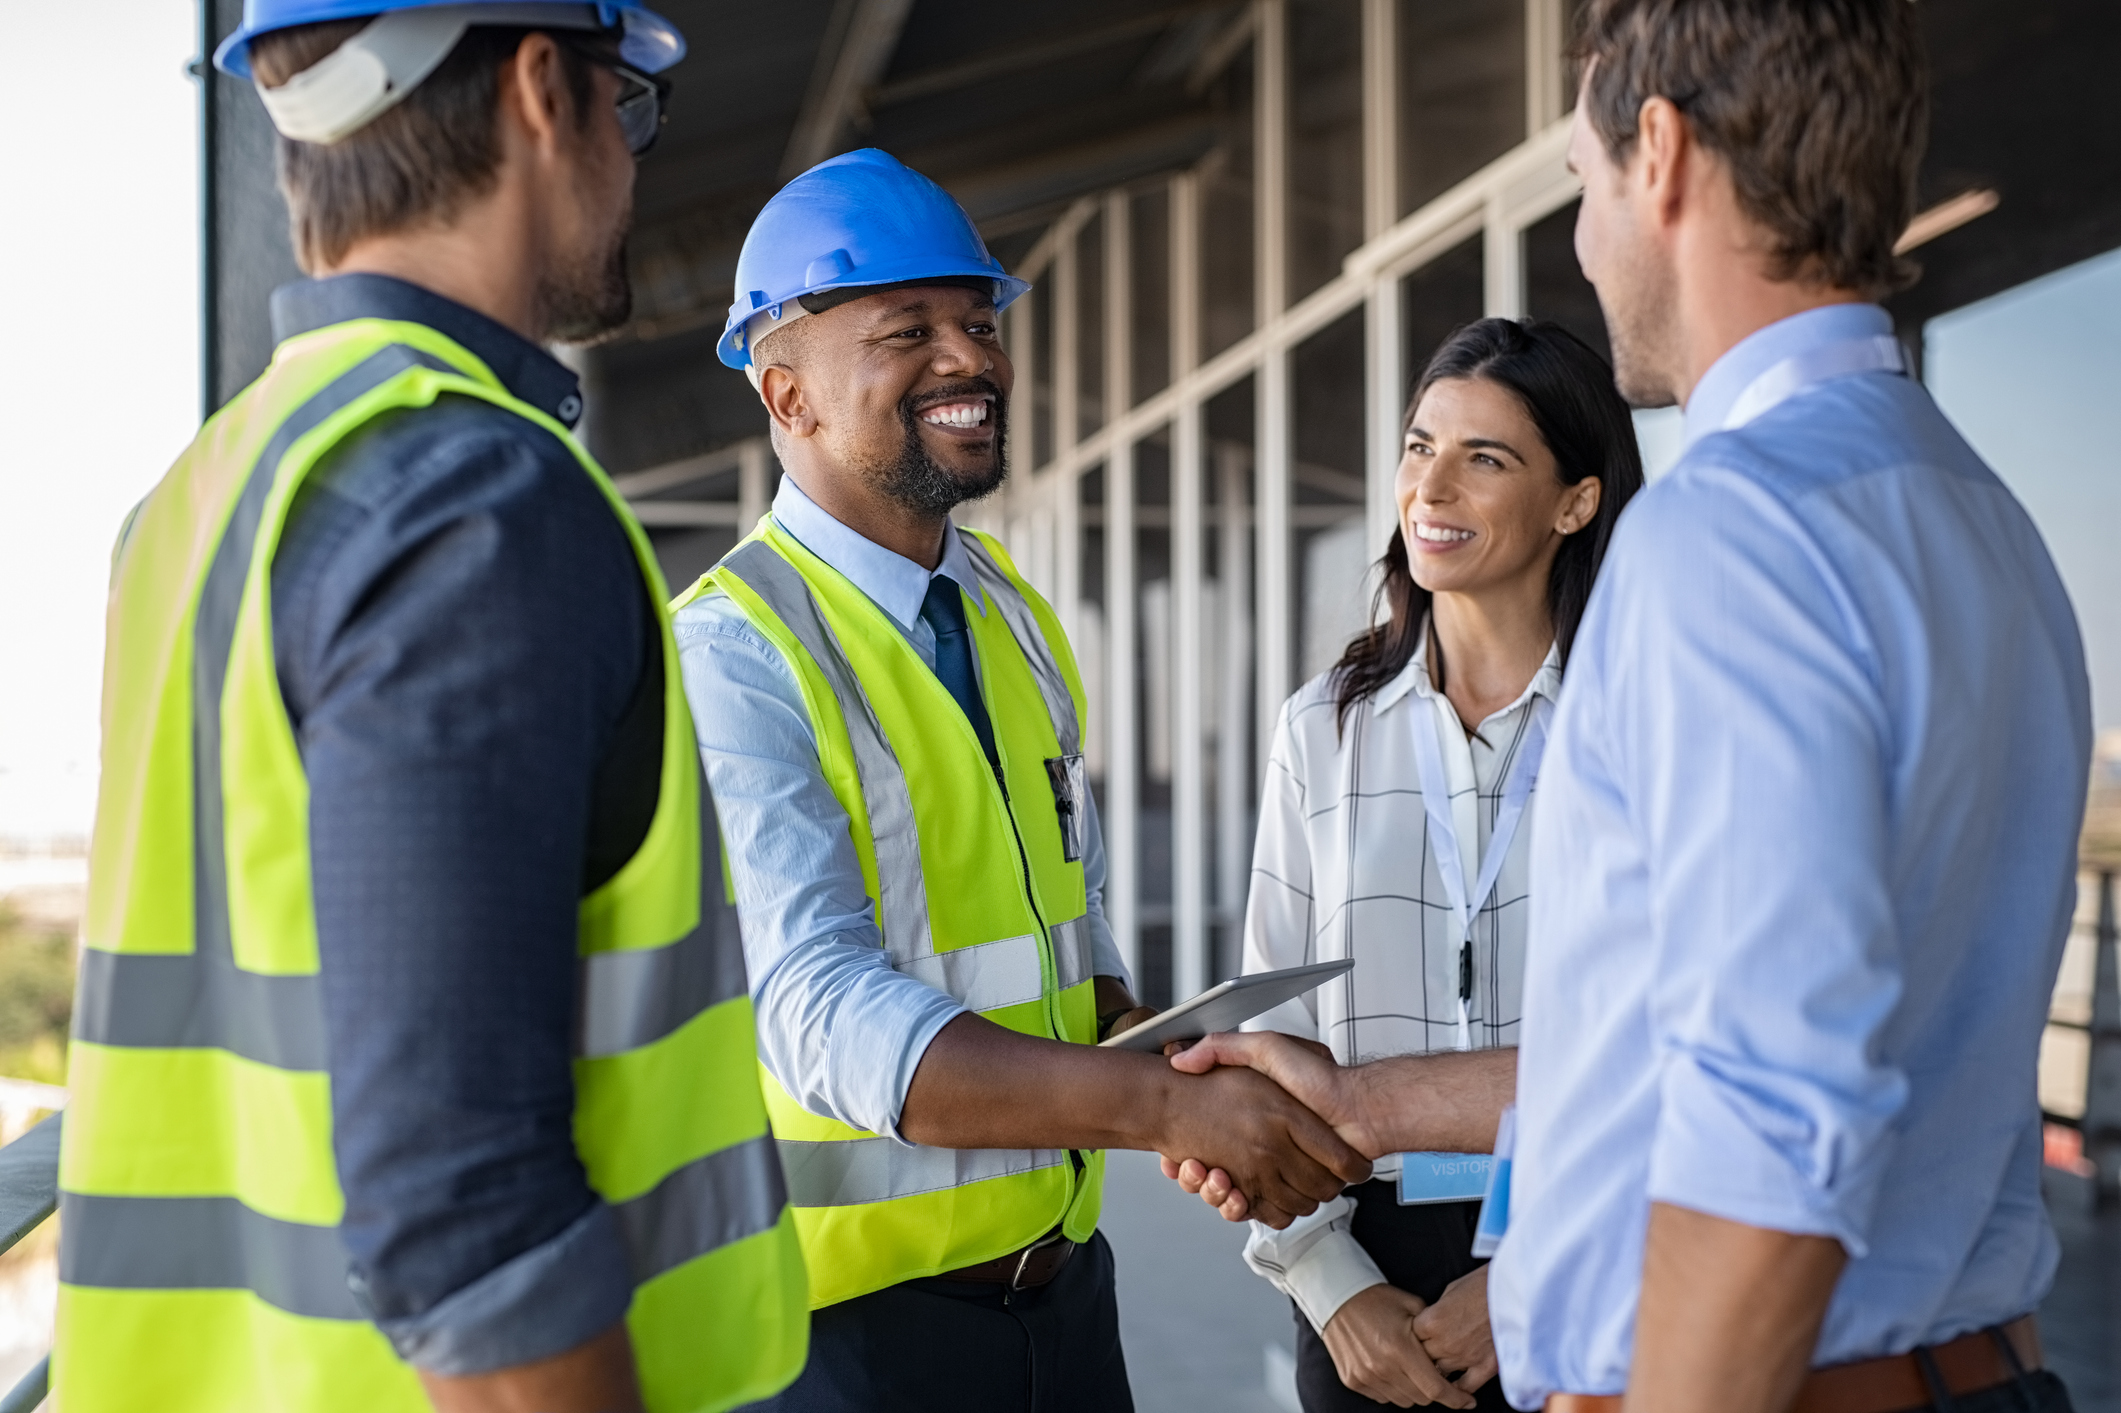 Contractor shaking hands with man